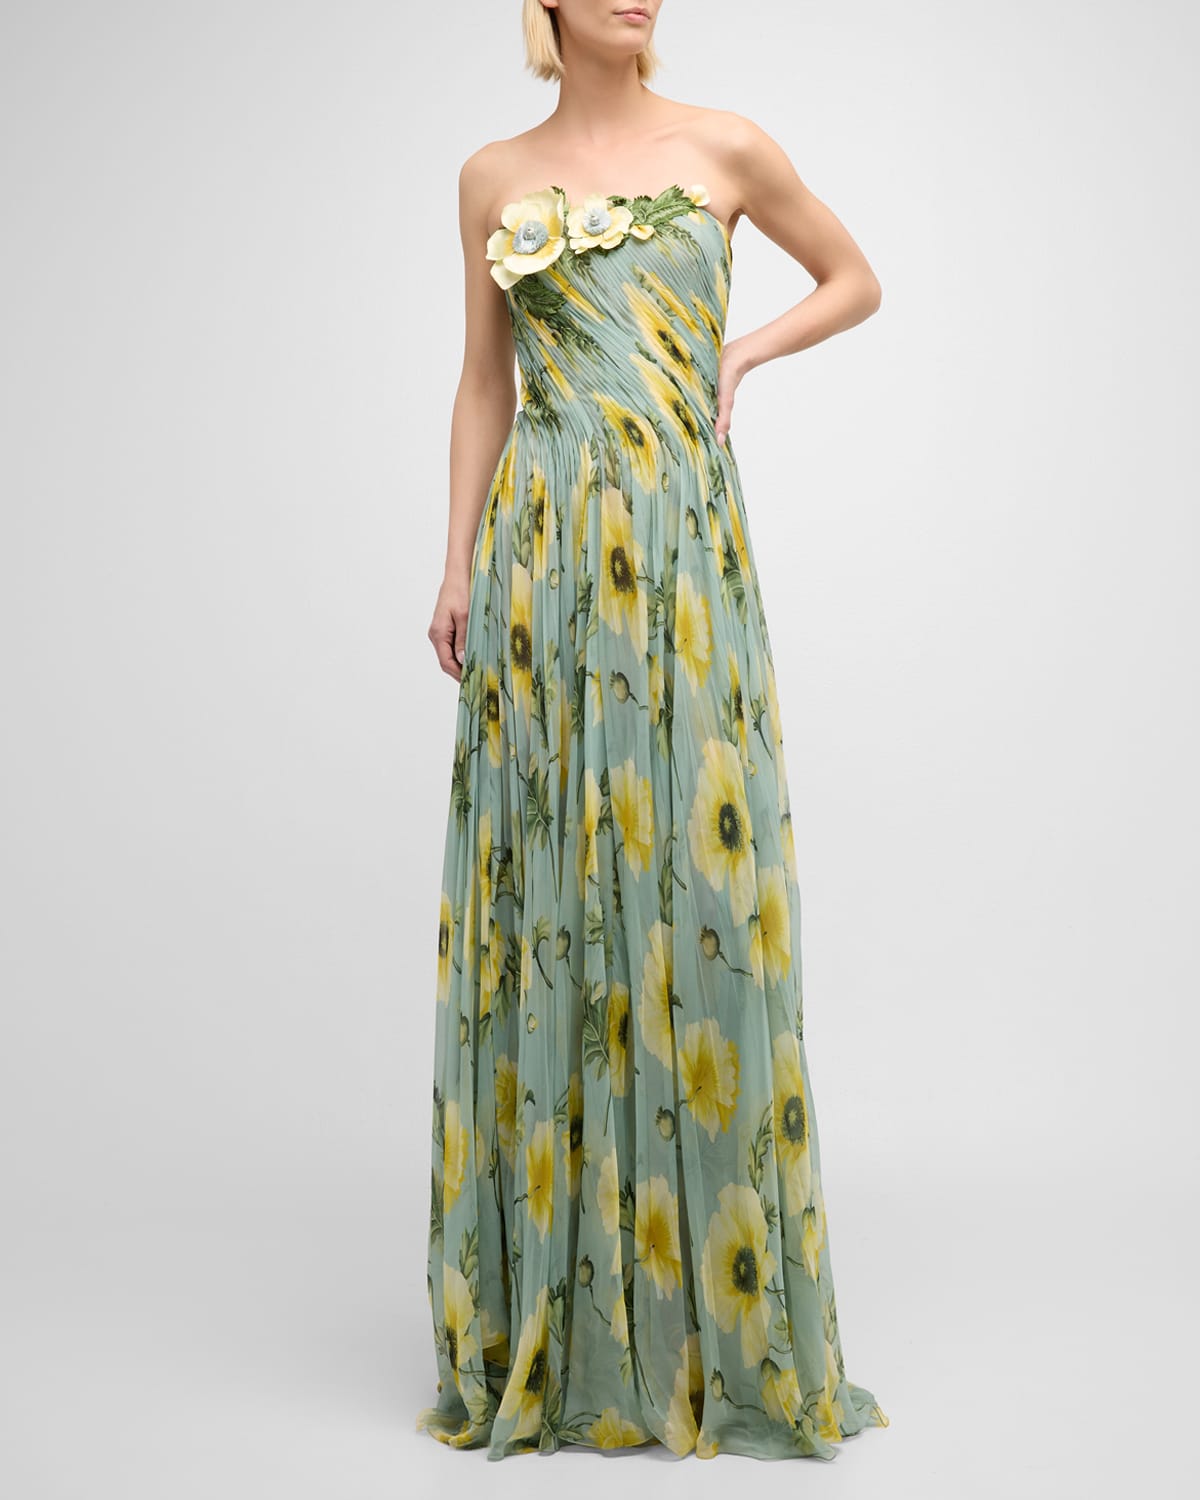 Draped Poppies Chiffon Gown with Threadwork Embroidered Details